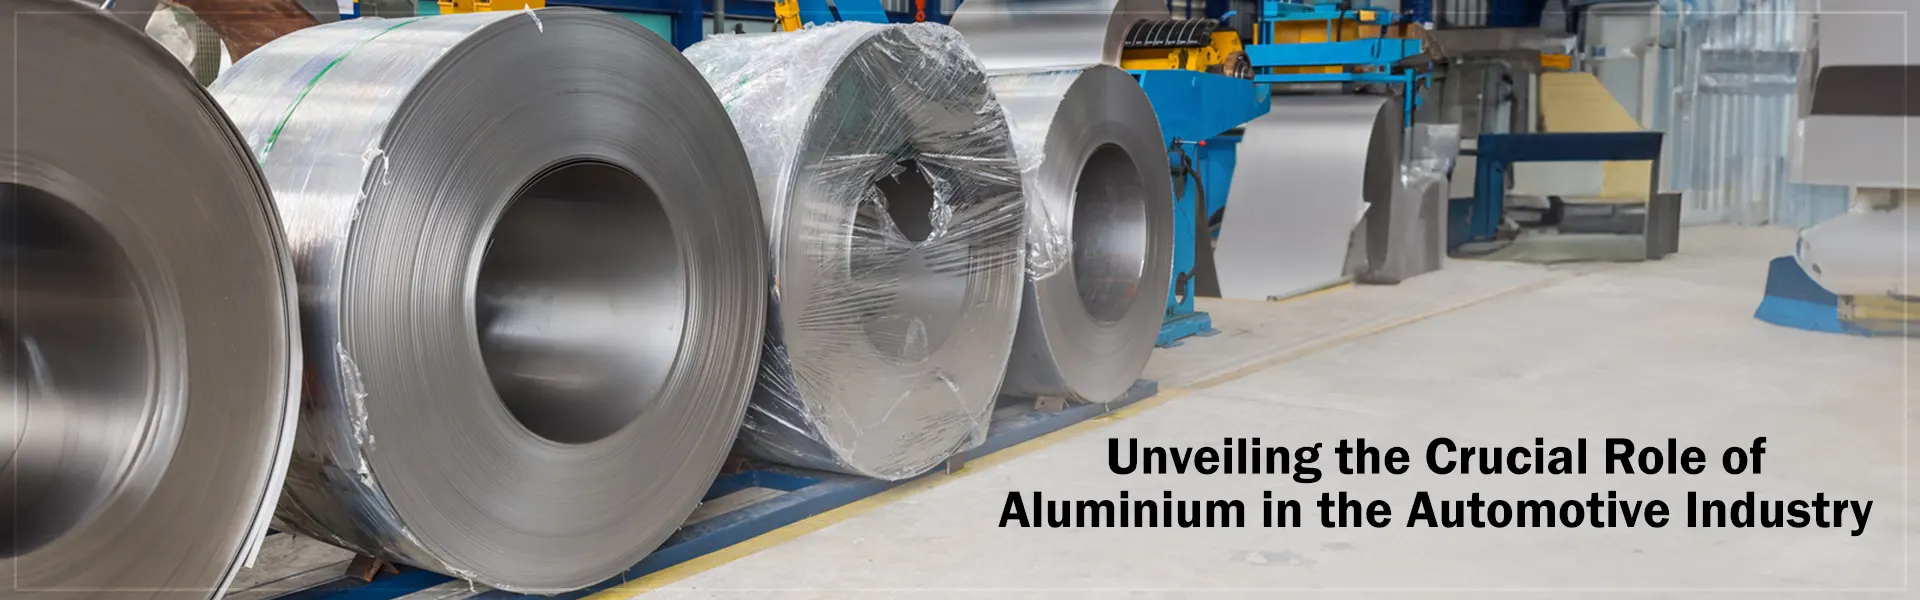 Unveiling the Crucial Role of Aluminium in the Automotive Industry